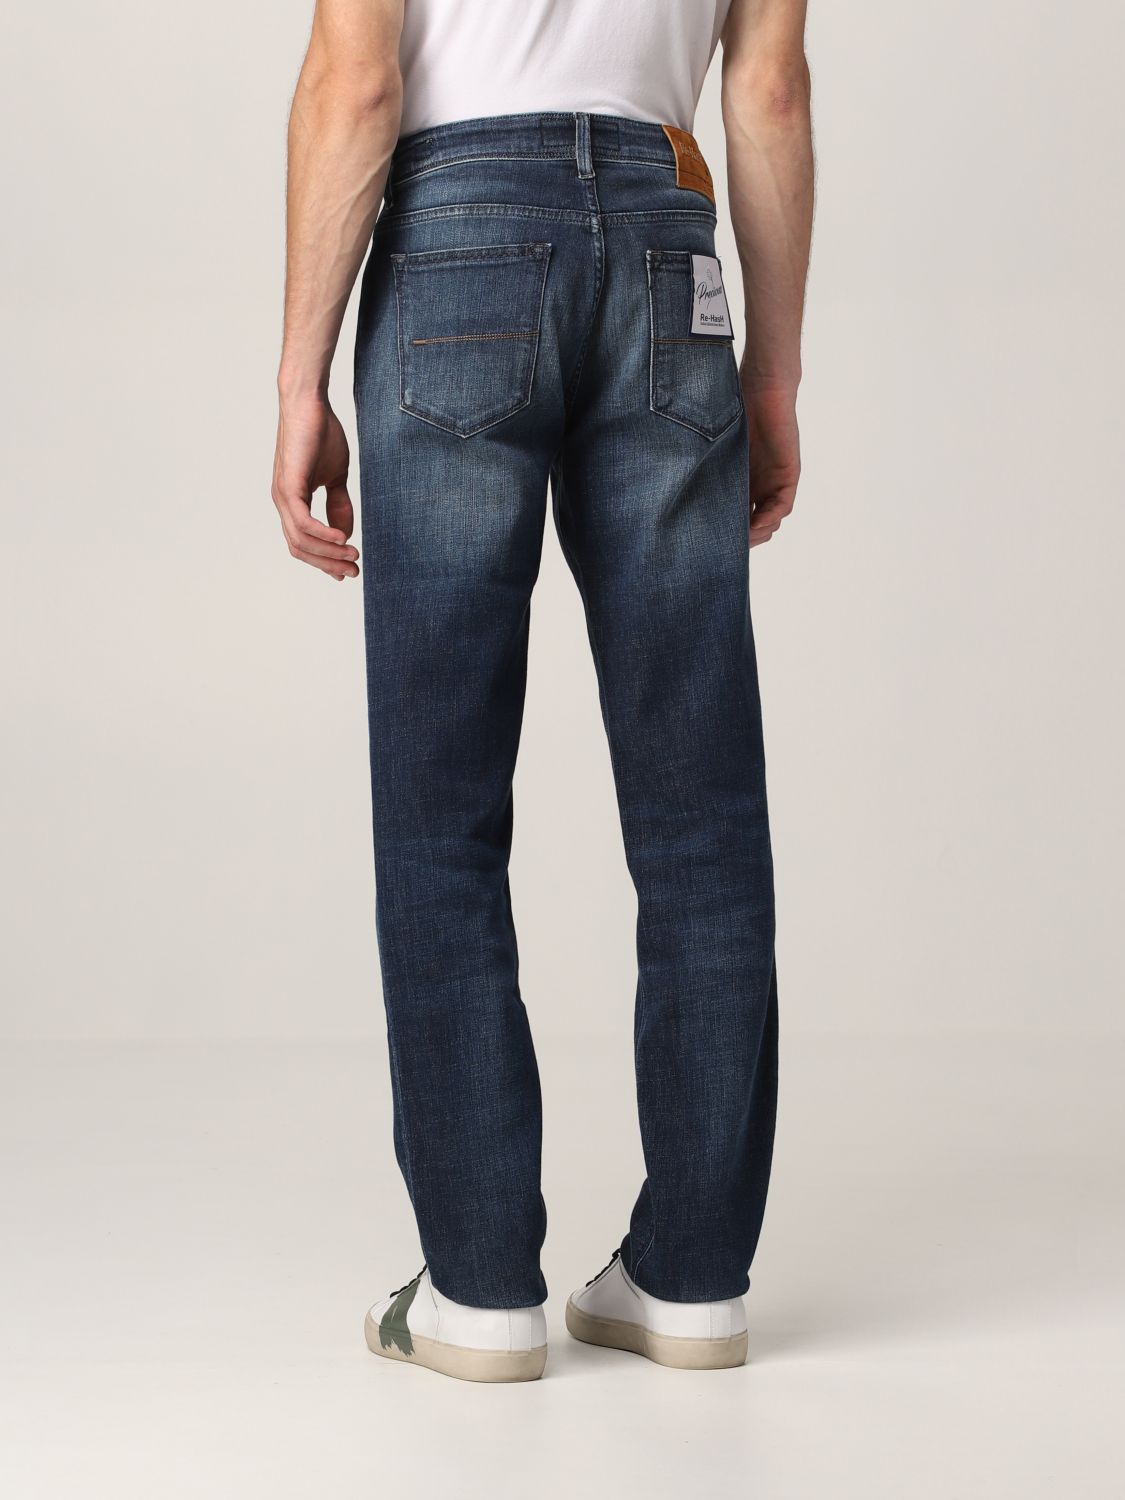 Jeans Re-Hash: Jeans hombre Re-hash azul oscuro 2